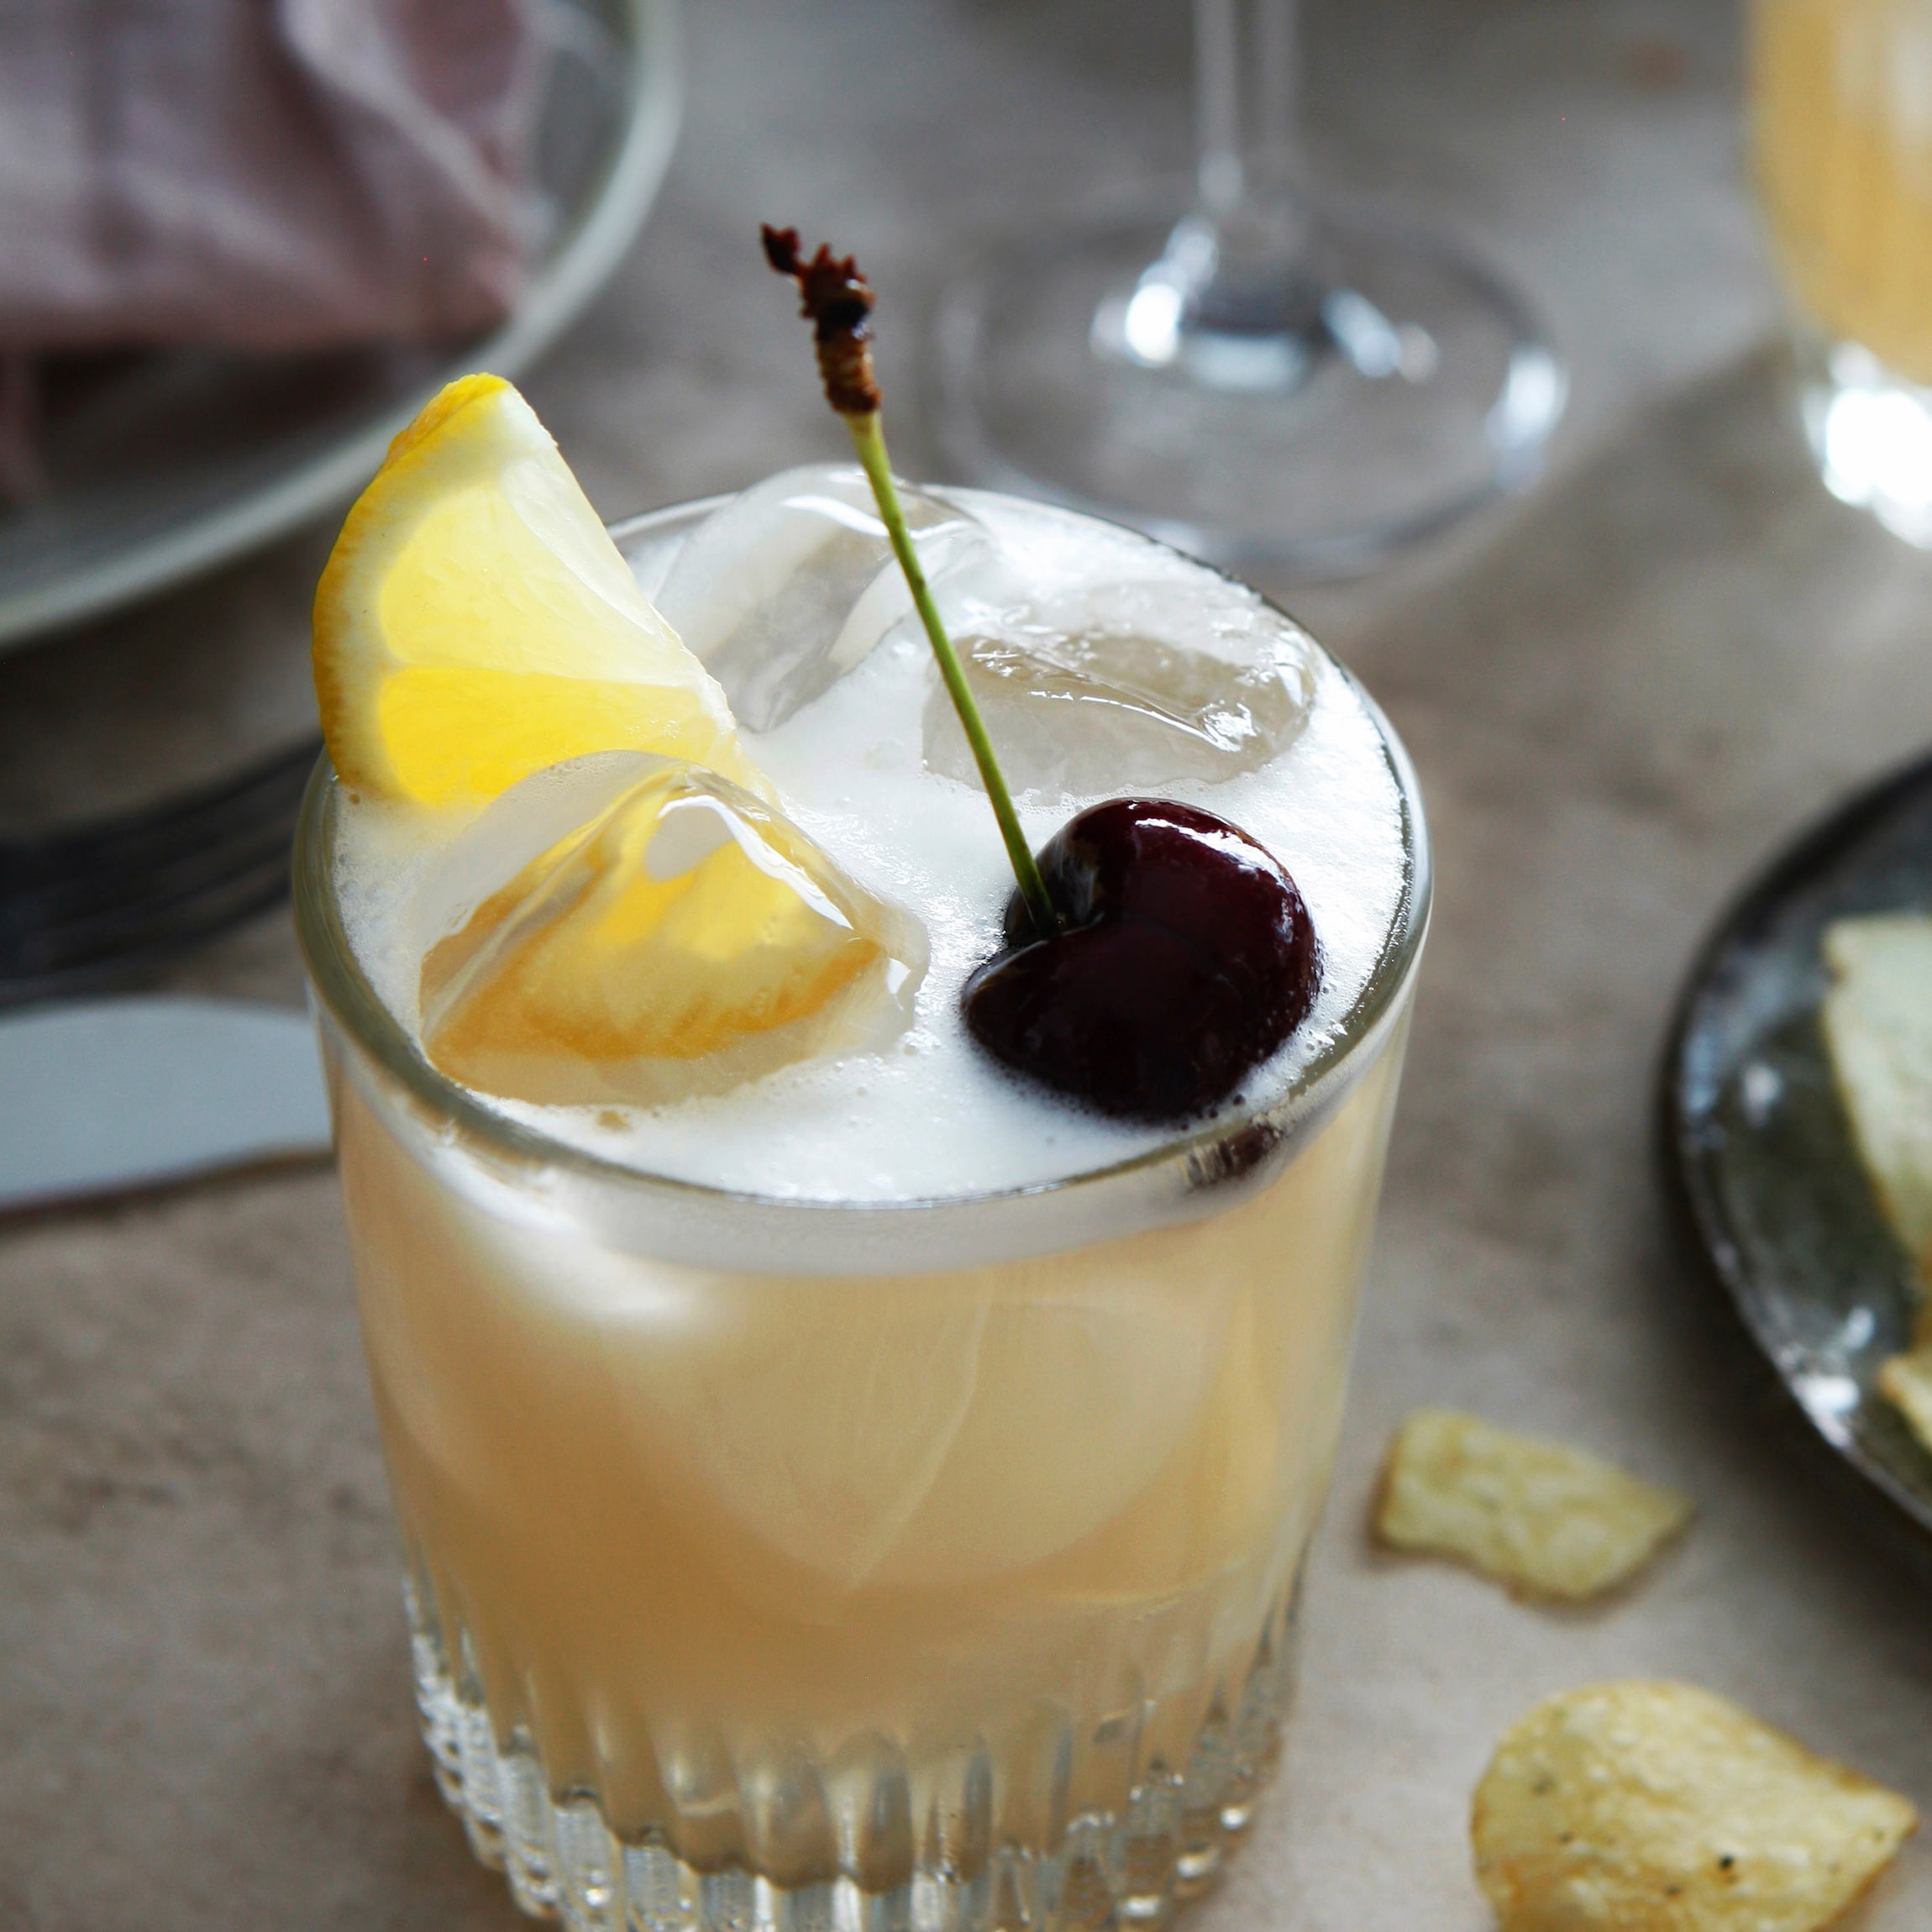 tequila sour recipe ml - Goes Very Well Blogsphere Picture Galleries